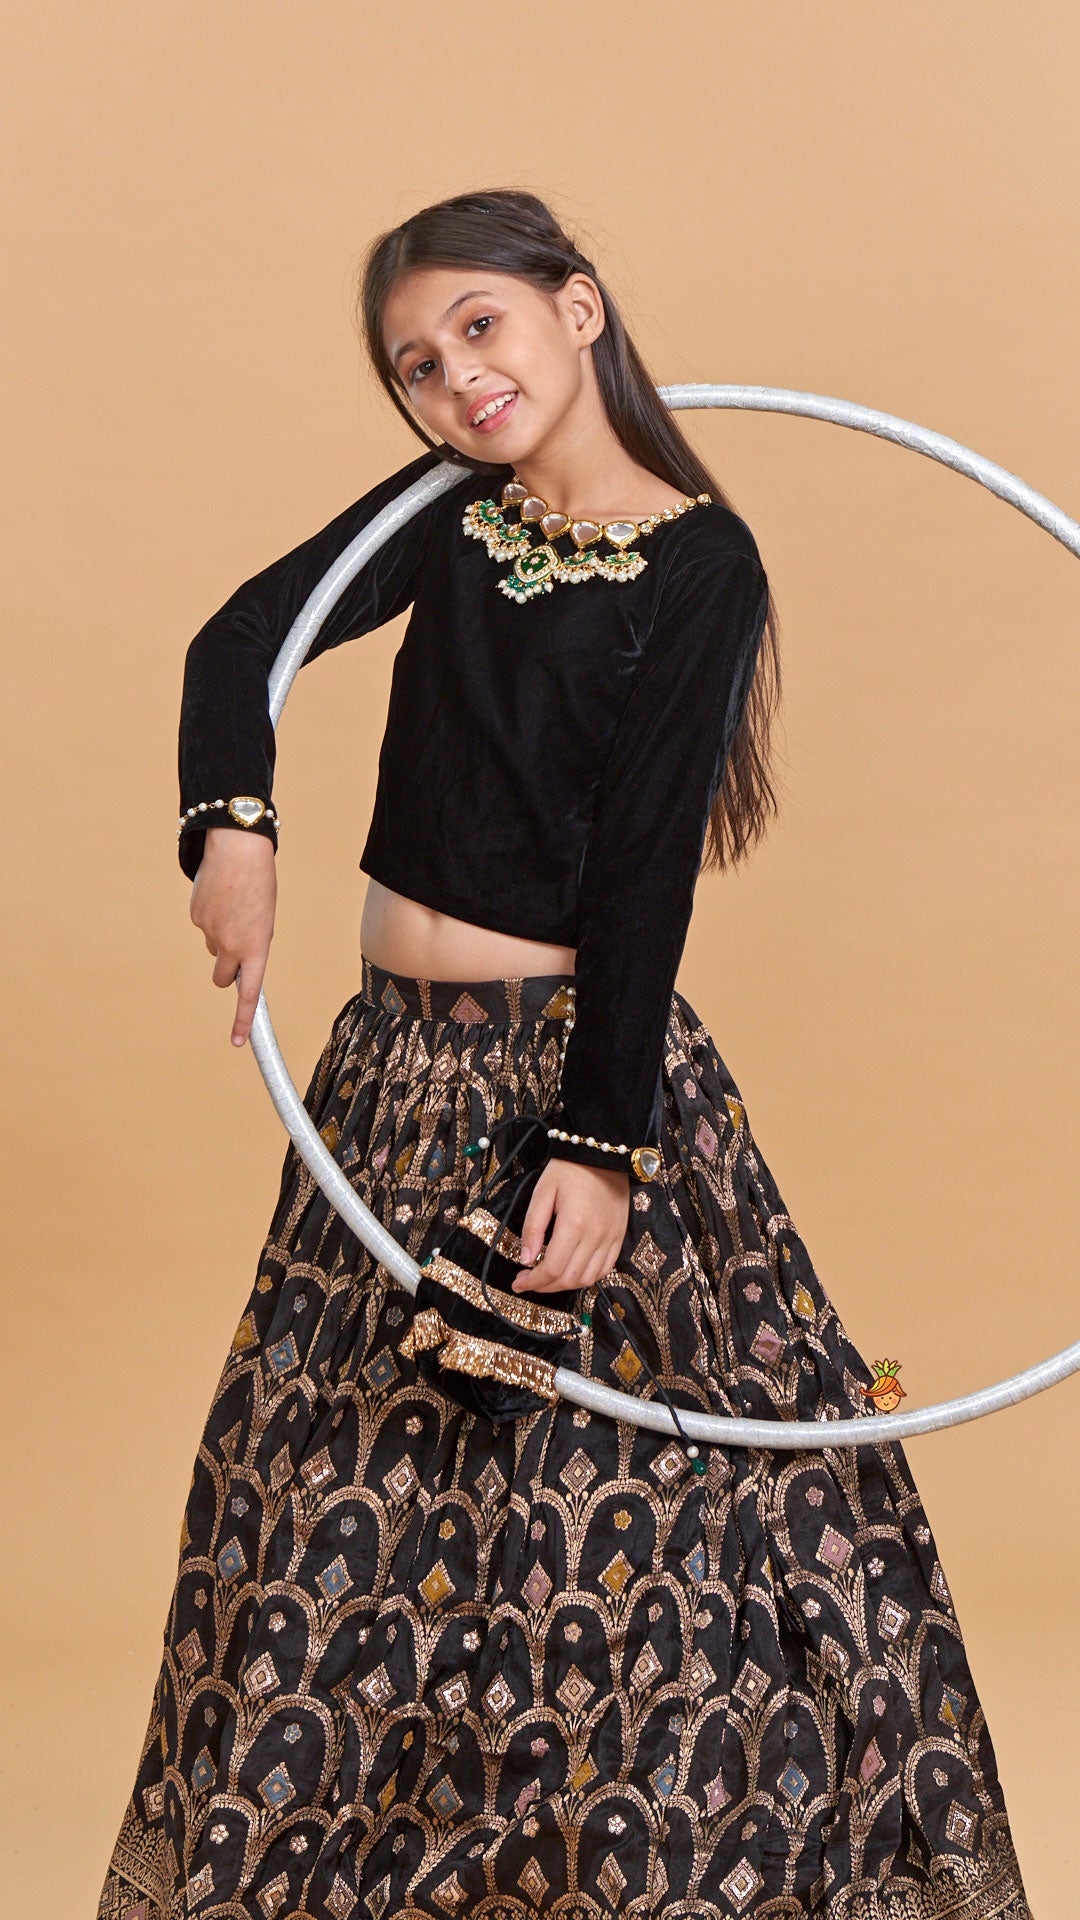 Stone Studded Black Velvet Top And Brocade Embroidered Lehenga With Shimmery Fringes Dupatta And Potli Bag